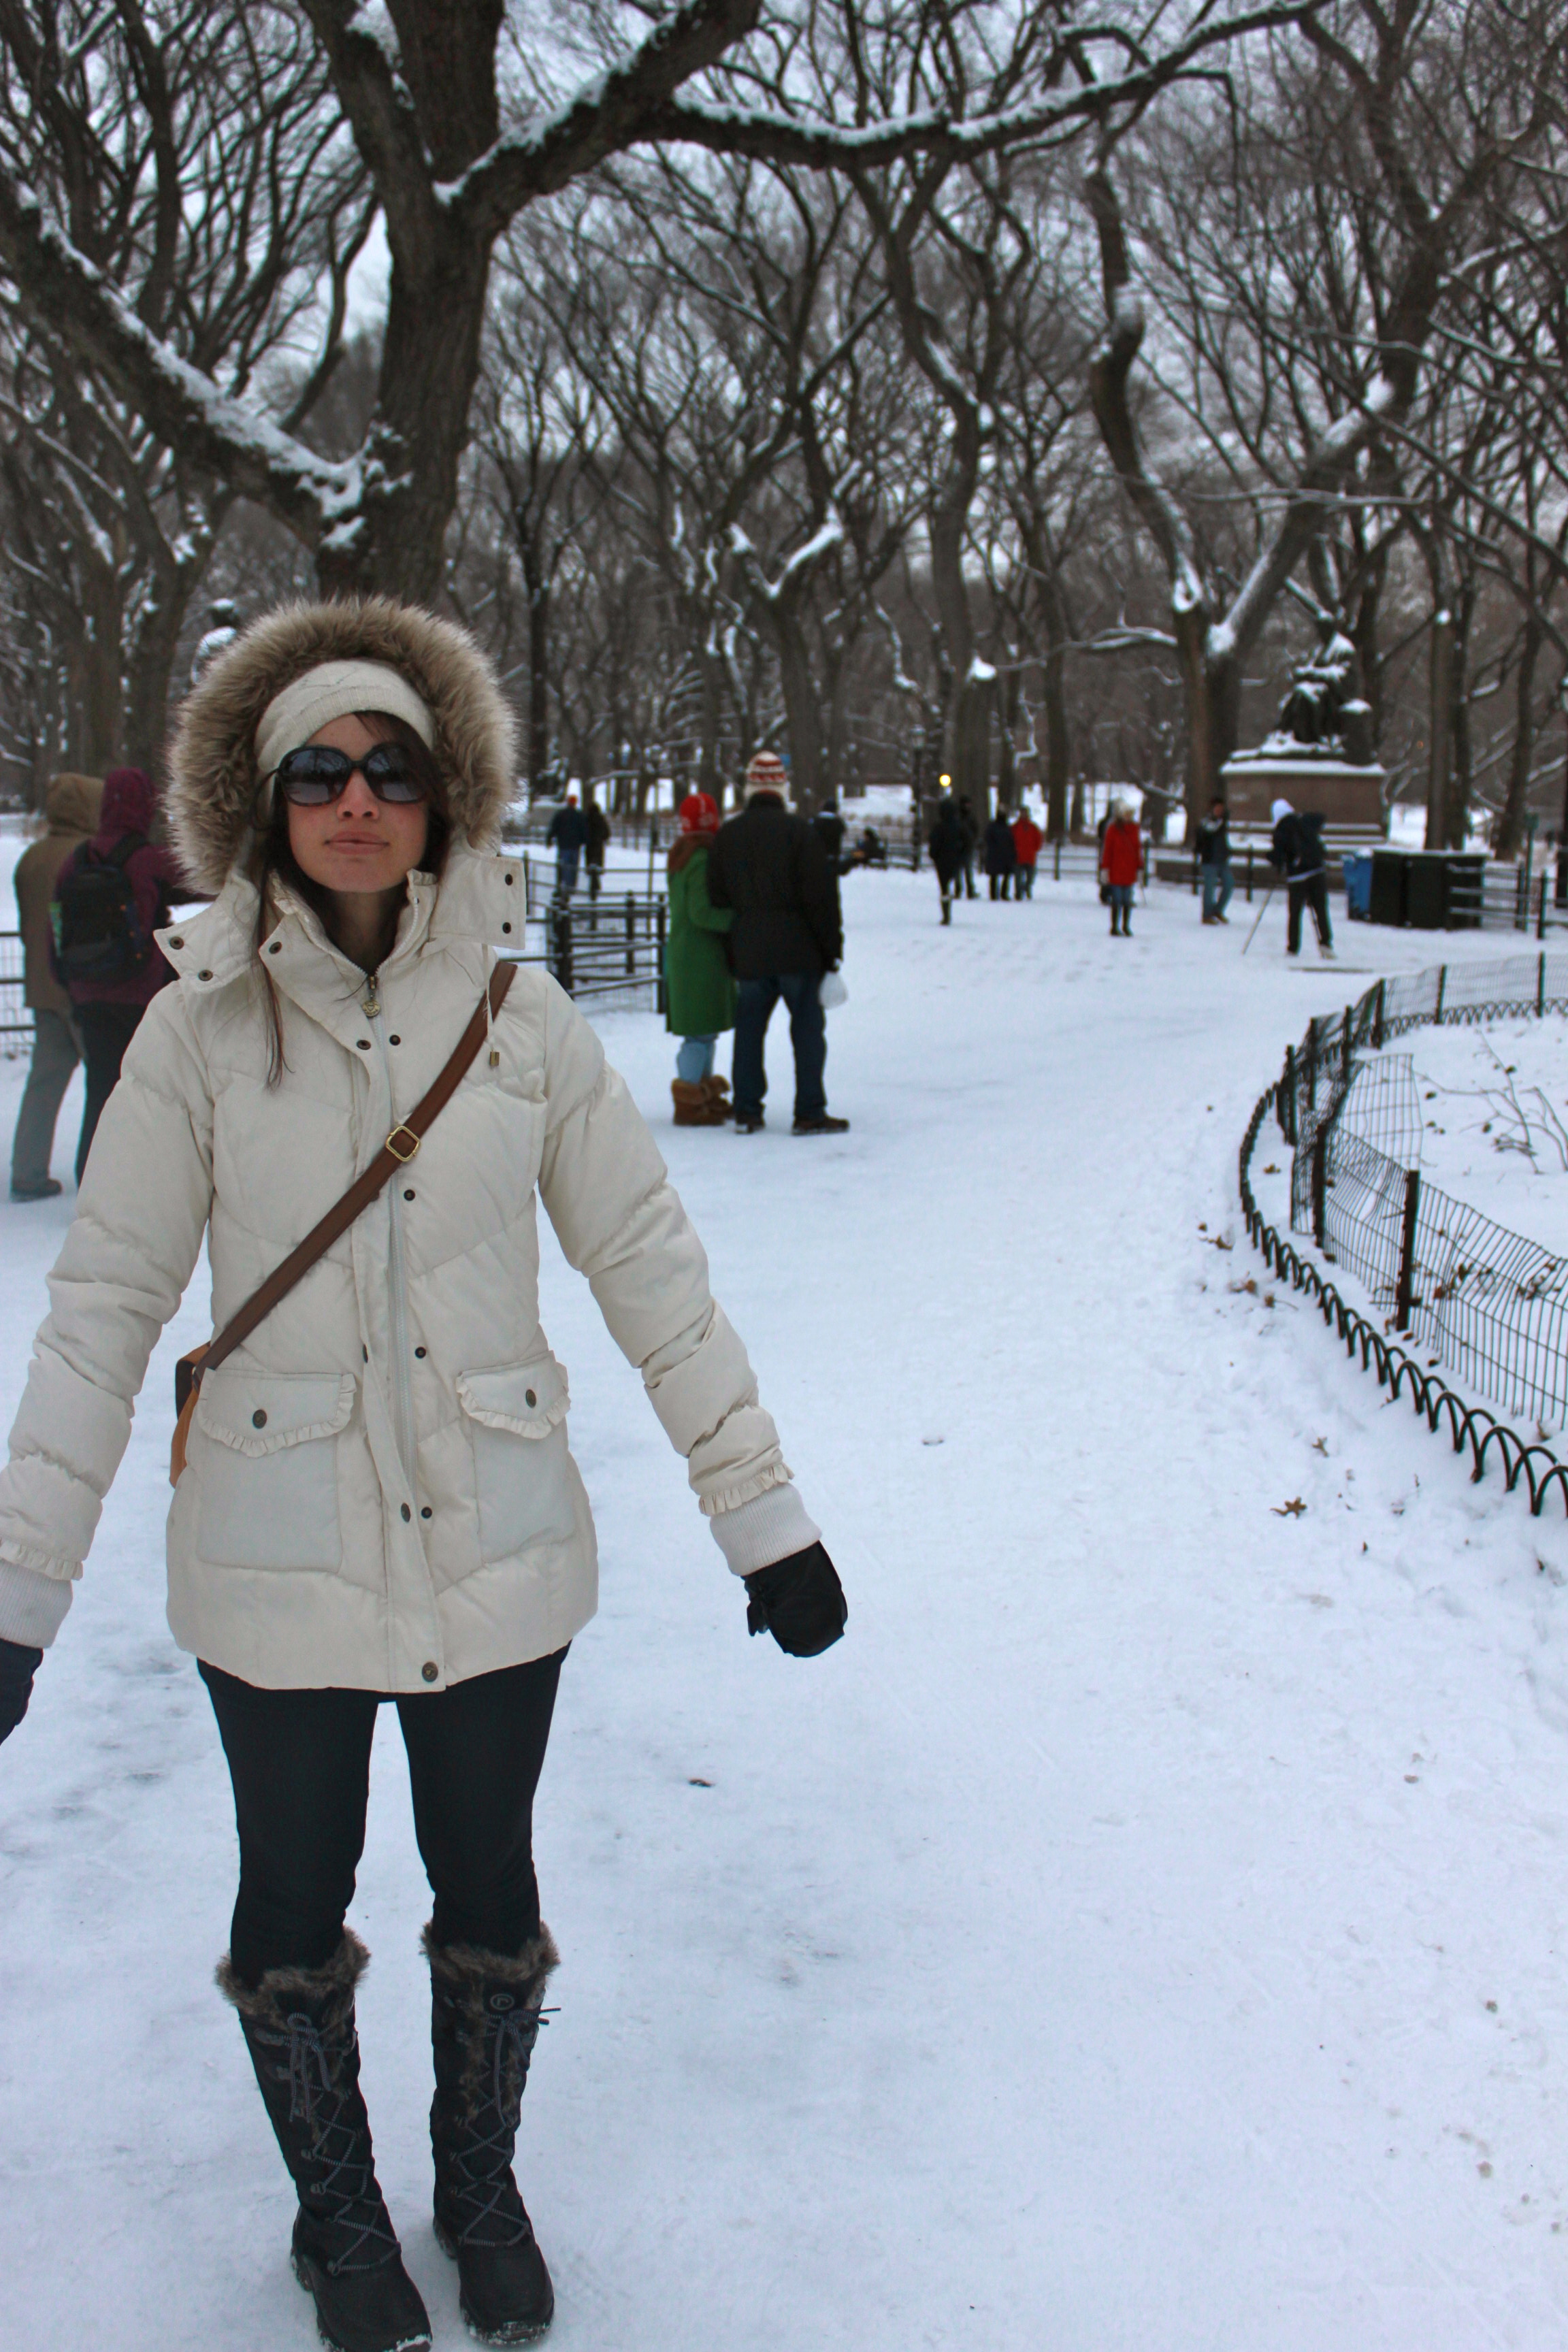 My awkward, lost expression in this picture cracks me up. "What is all this white stuff?  Why is it so cold??"